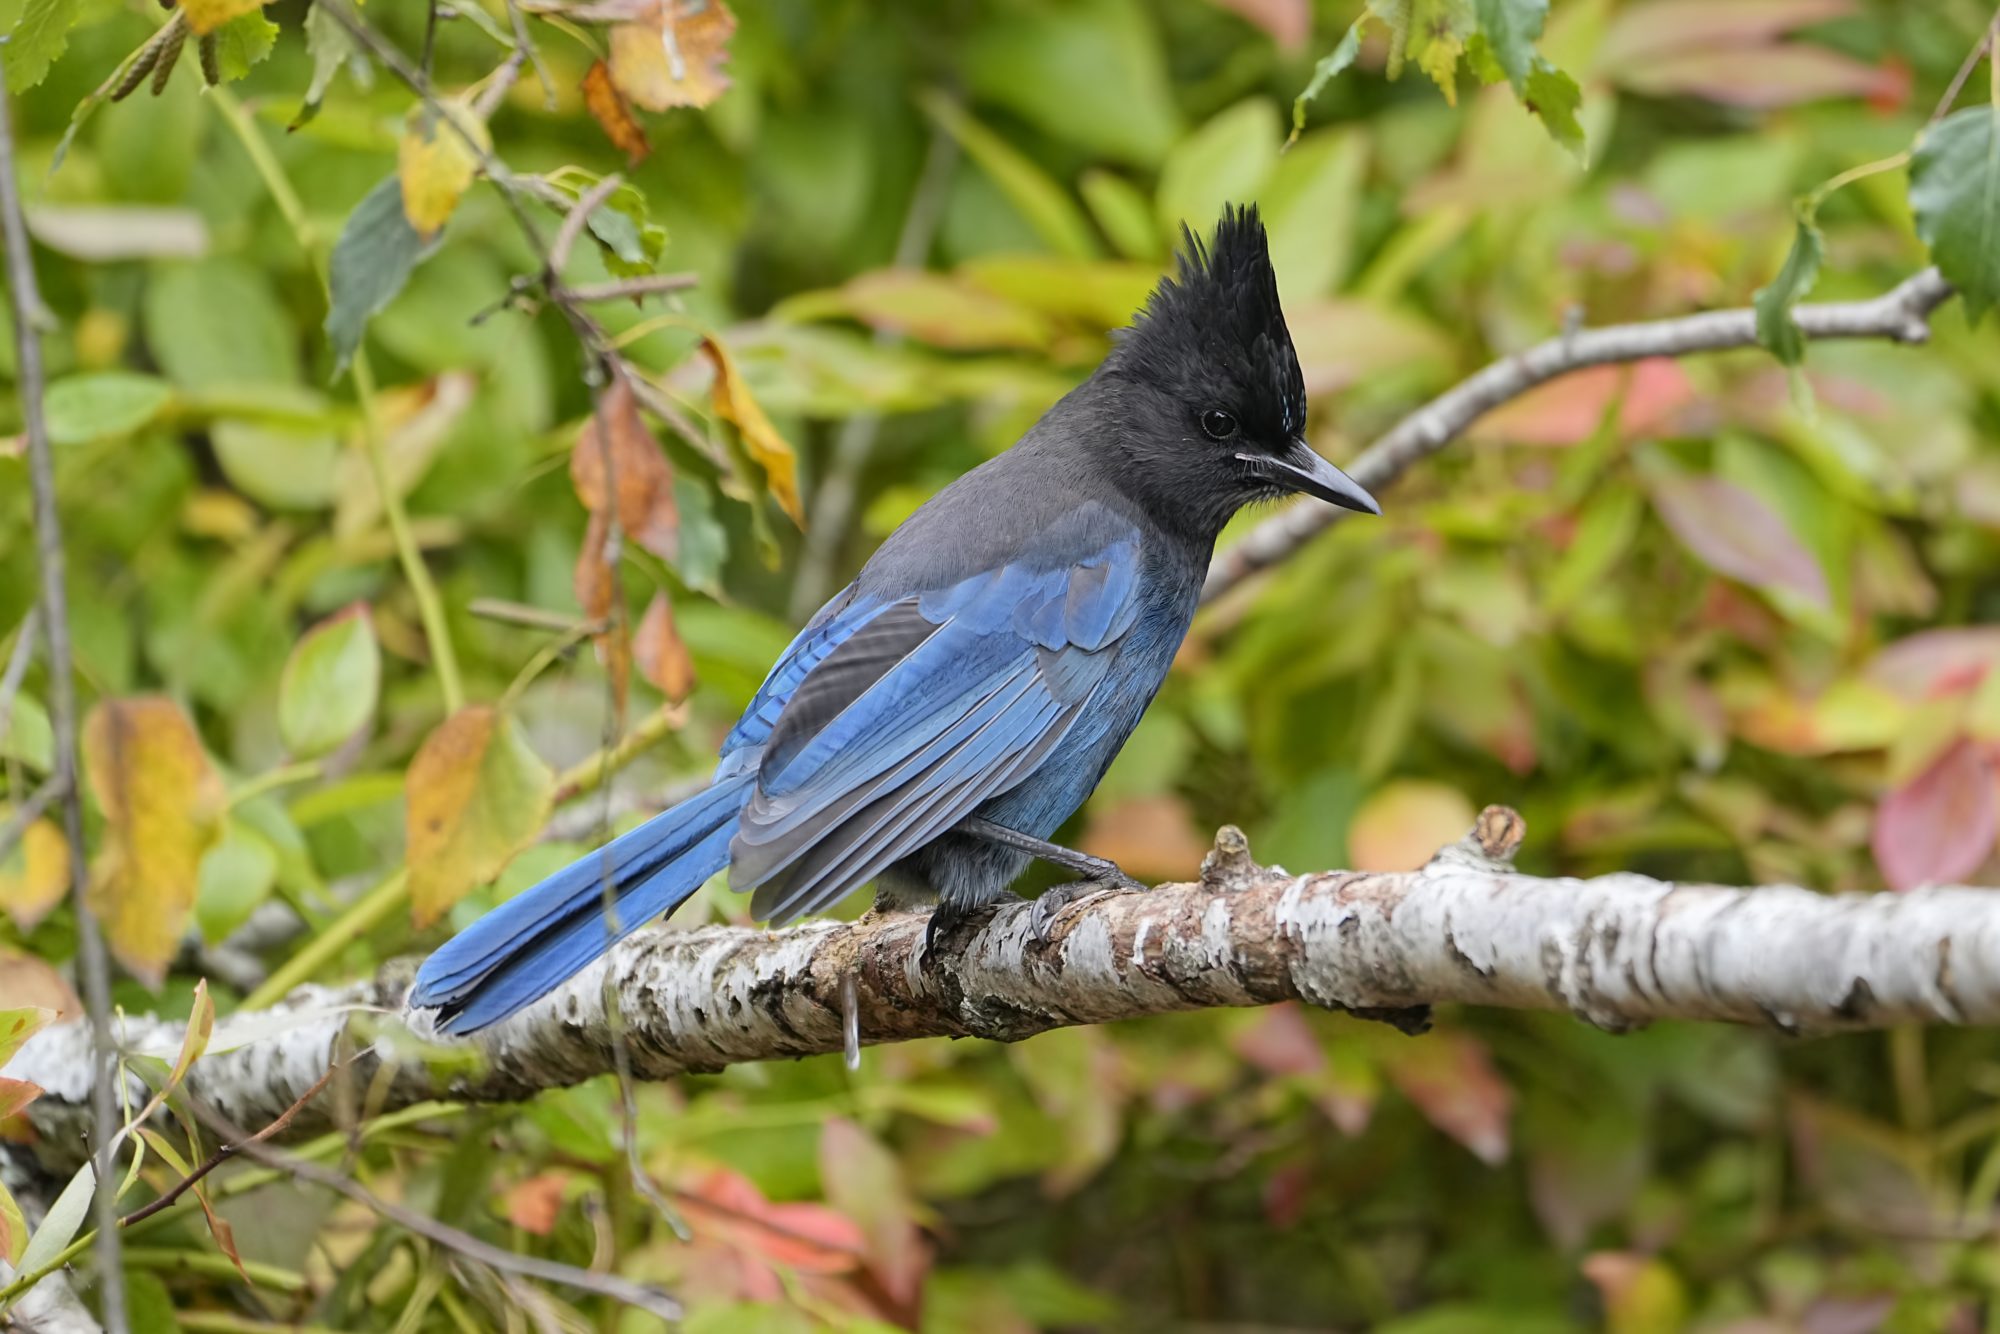 A Steller's Jay sitting on a branch, looking down